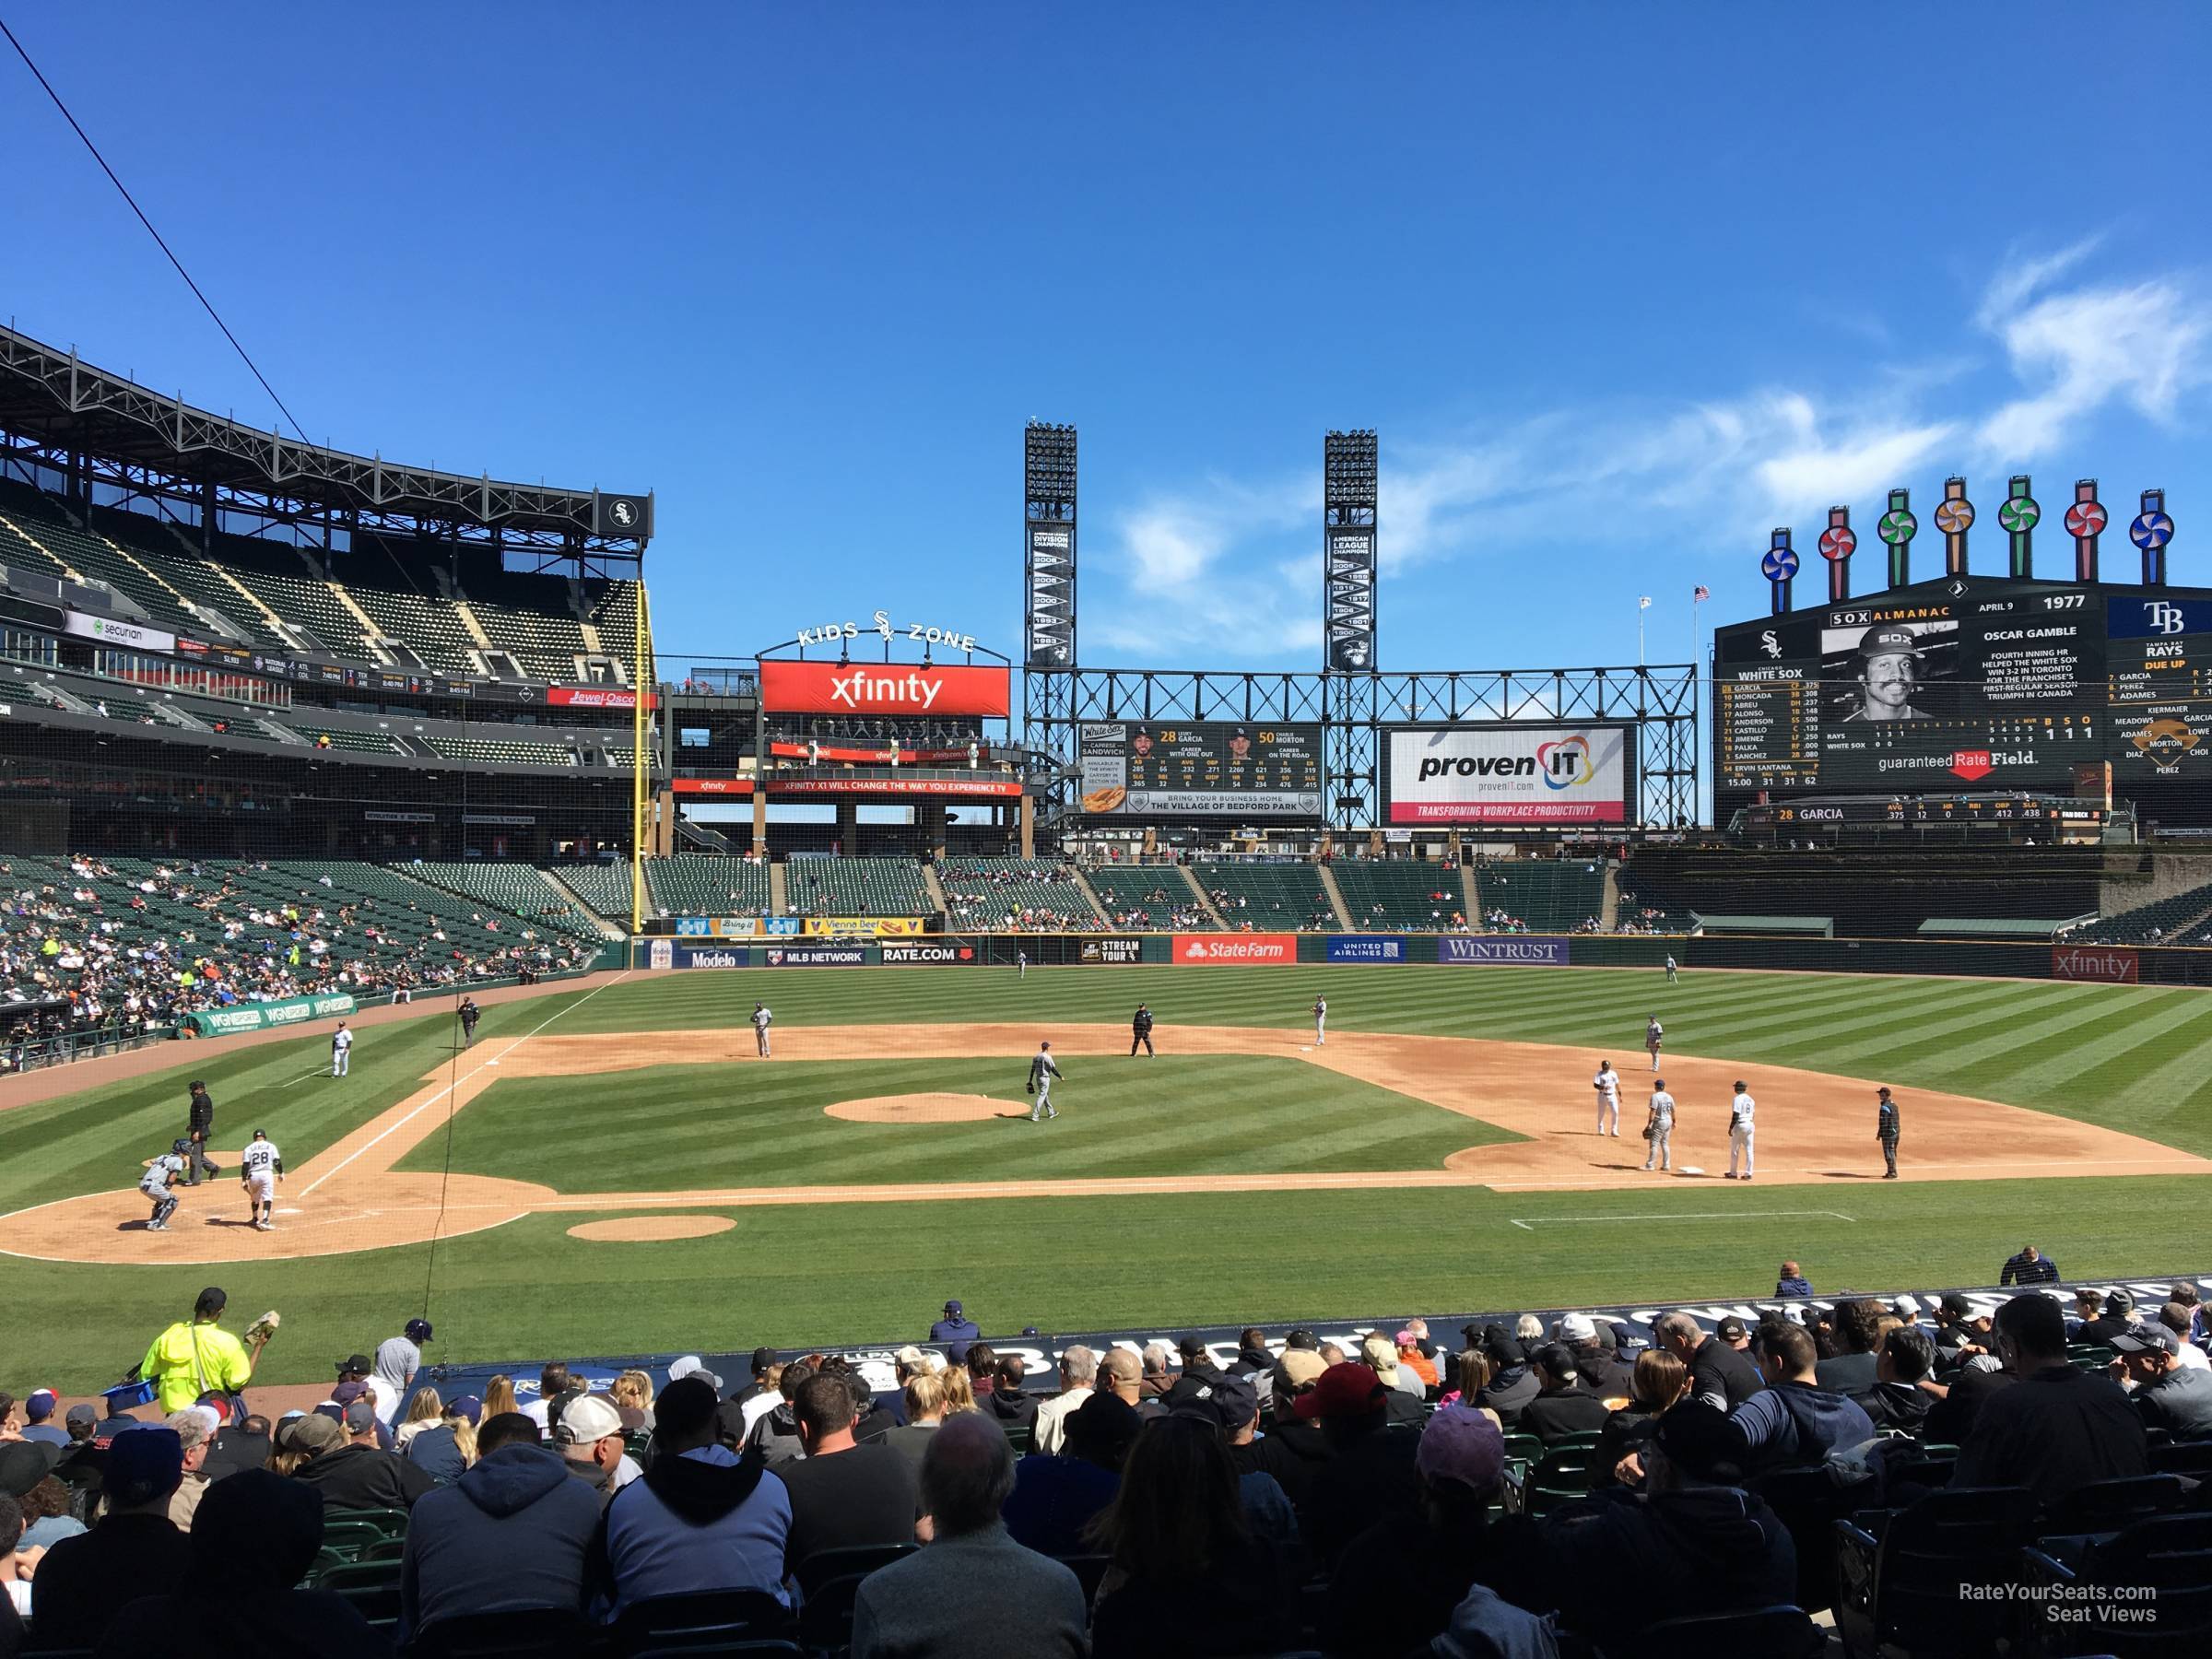 section 127, row 25 seat view  - guaranteed rate field